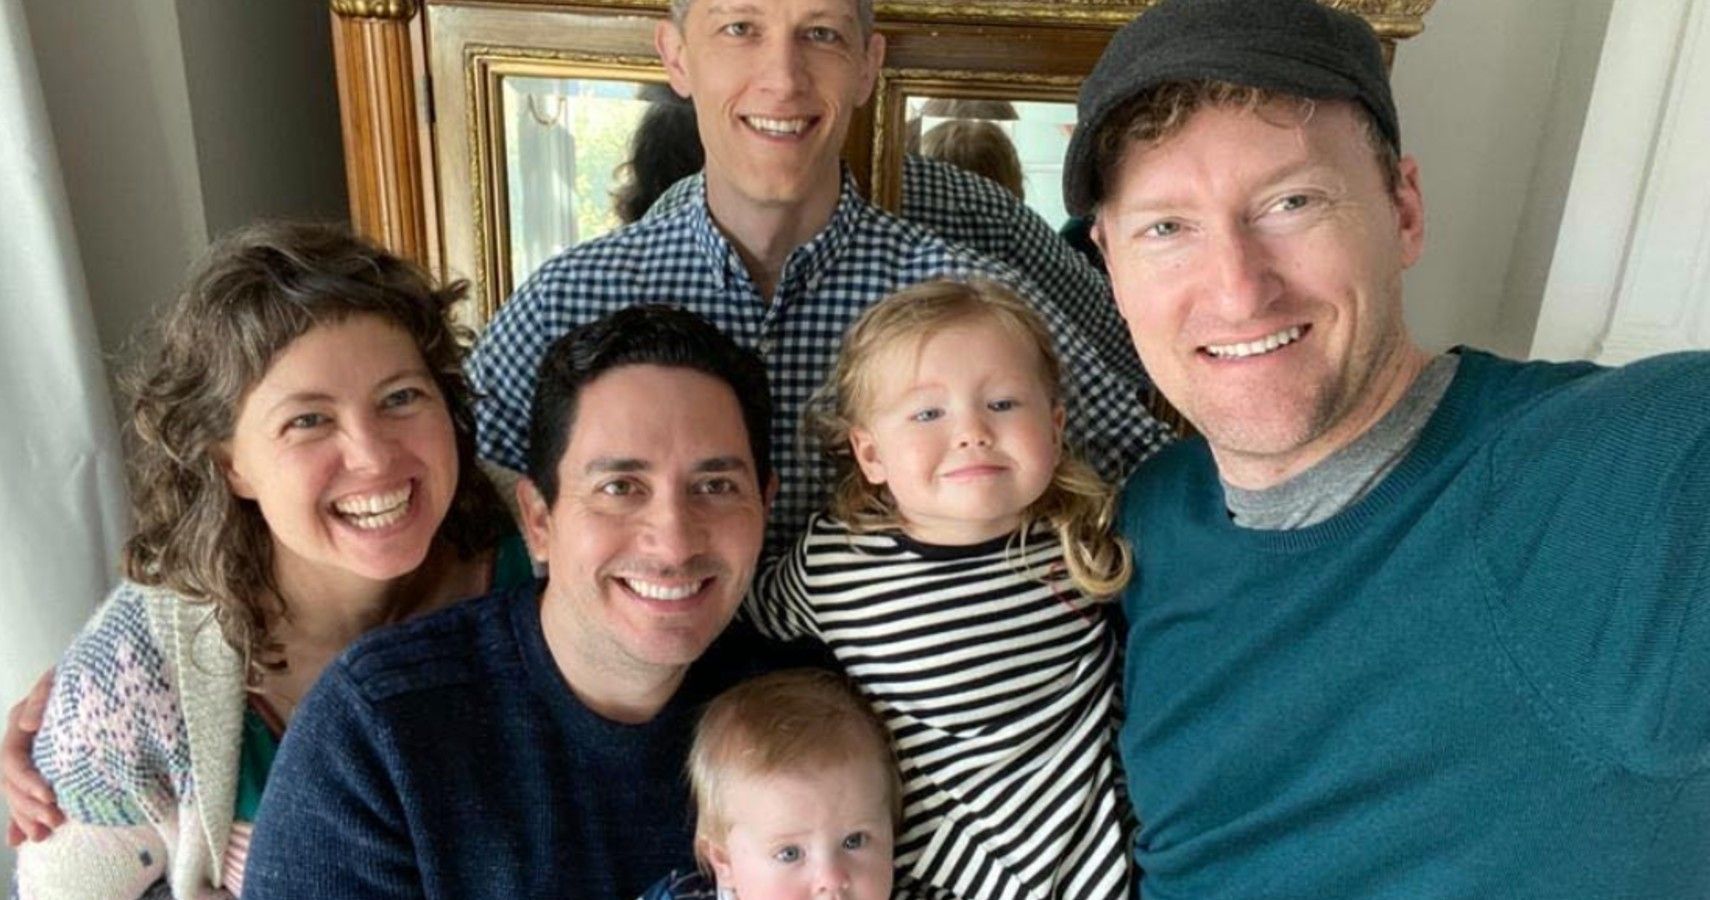 Polyamorous Family With Three Dads On Birth Certificate